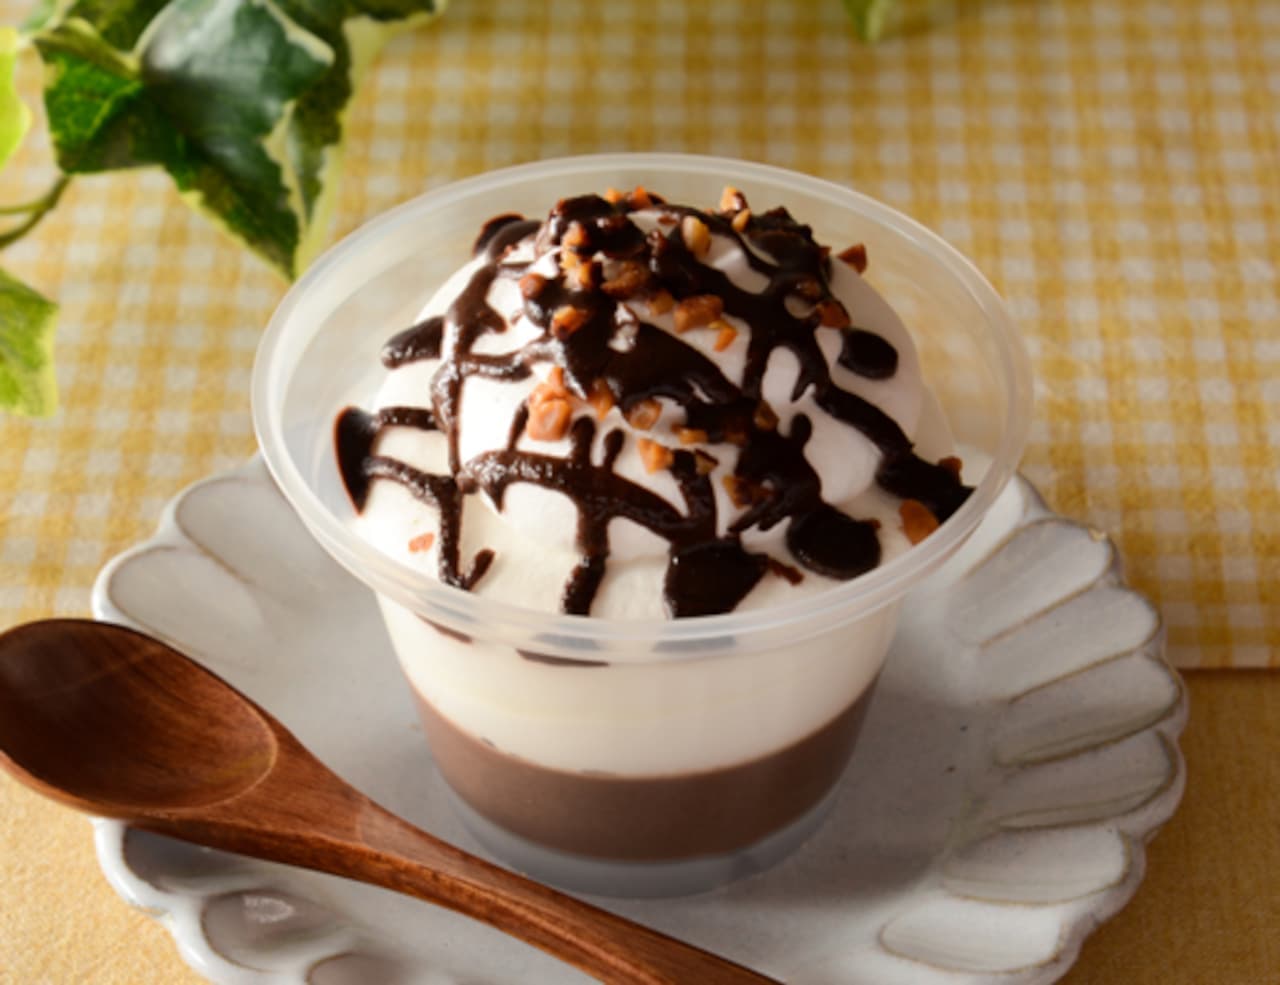 Lawson "Chocolat pudding with drowned cream